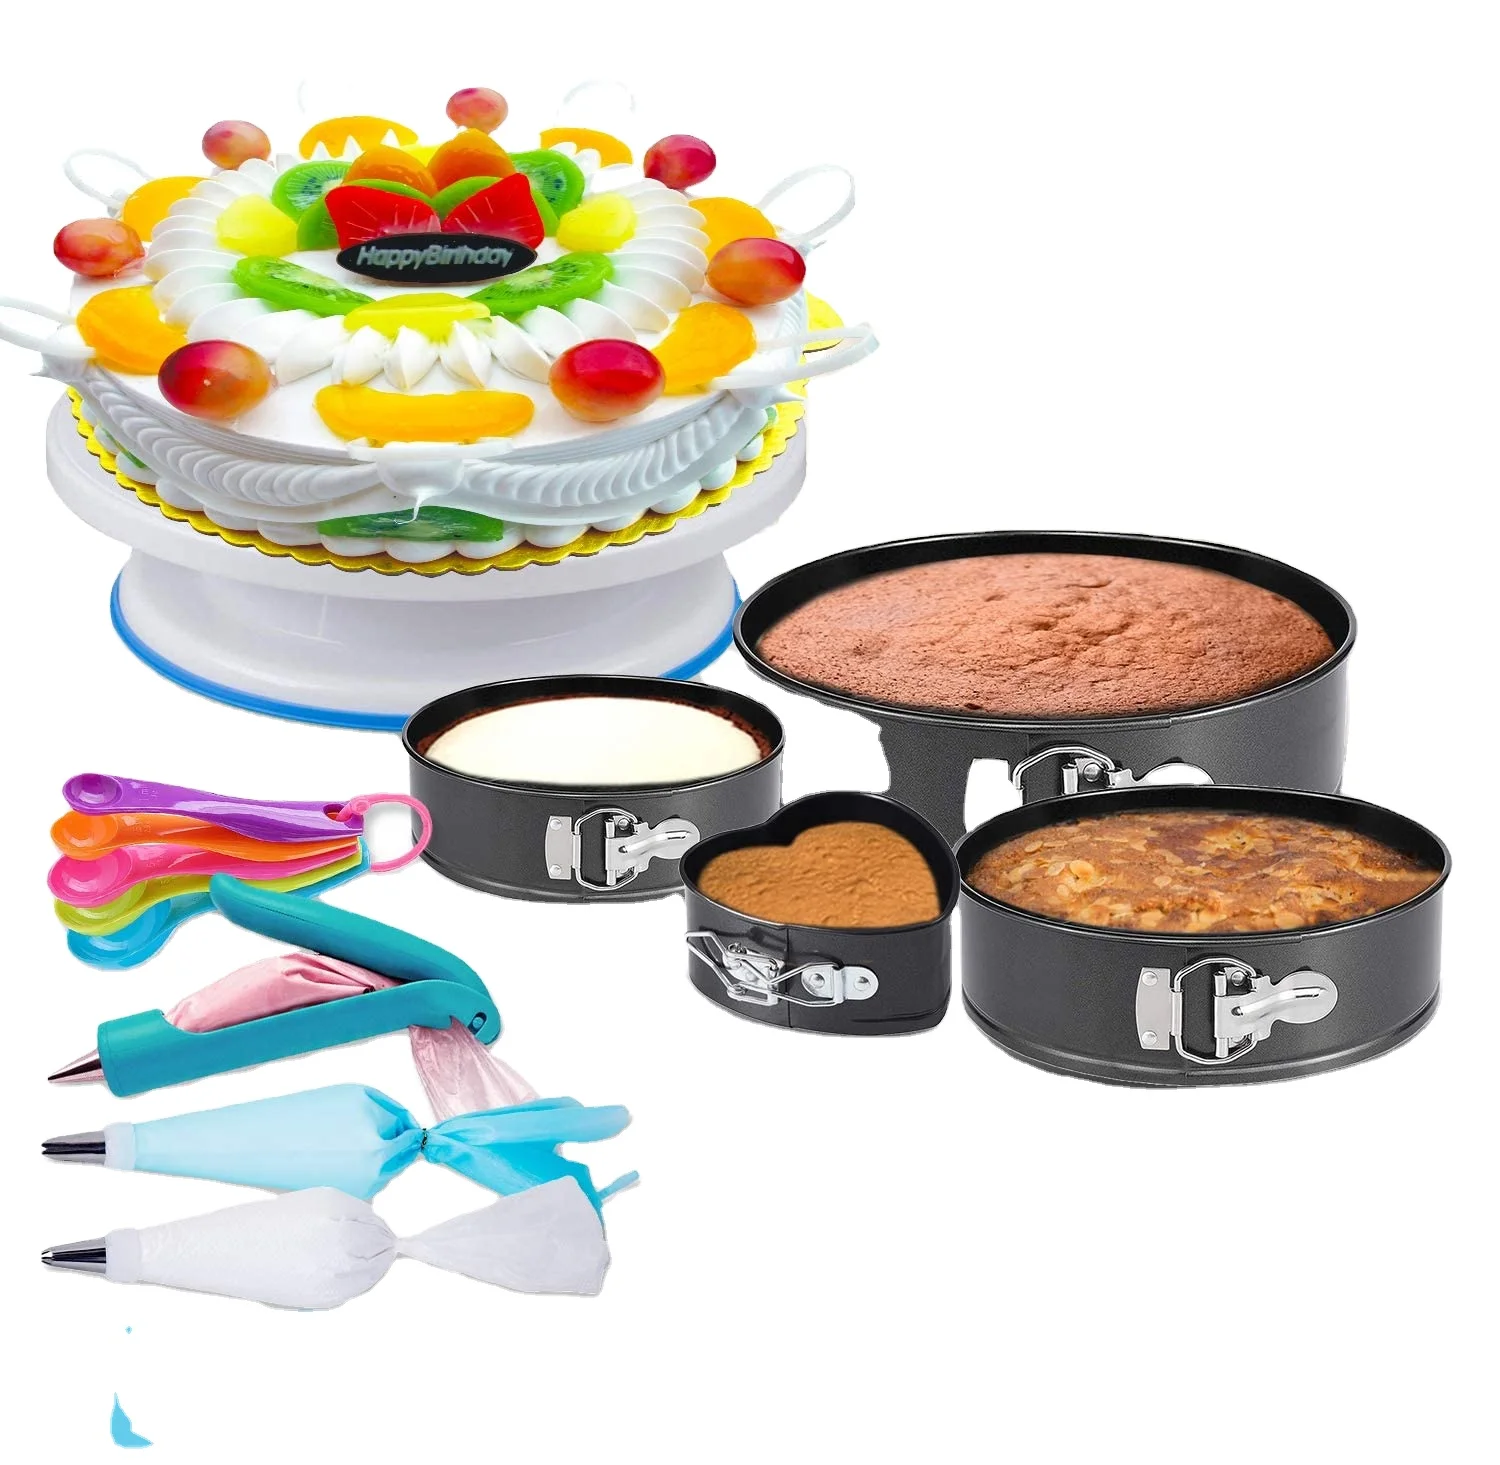 333 Piece Cake Decorating Supplies Baking Tools 42 Piping Nozzles Icing Tips 6 Disposable Bags1 Brush 3 Reusable Pastry - Buy Cake Decoration Baking Tools,Cake Decorating Icing Piping Nozzles Set,Cupcake Decoration